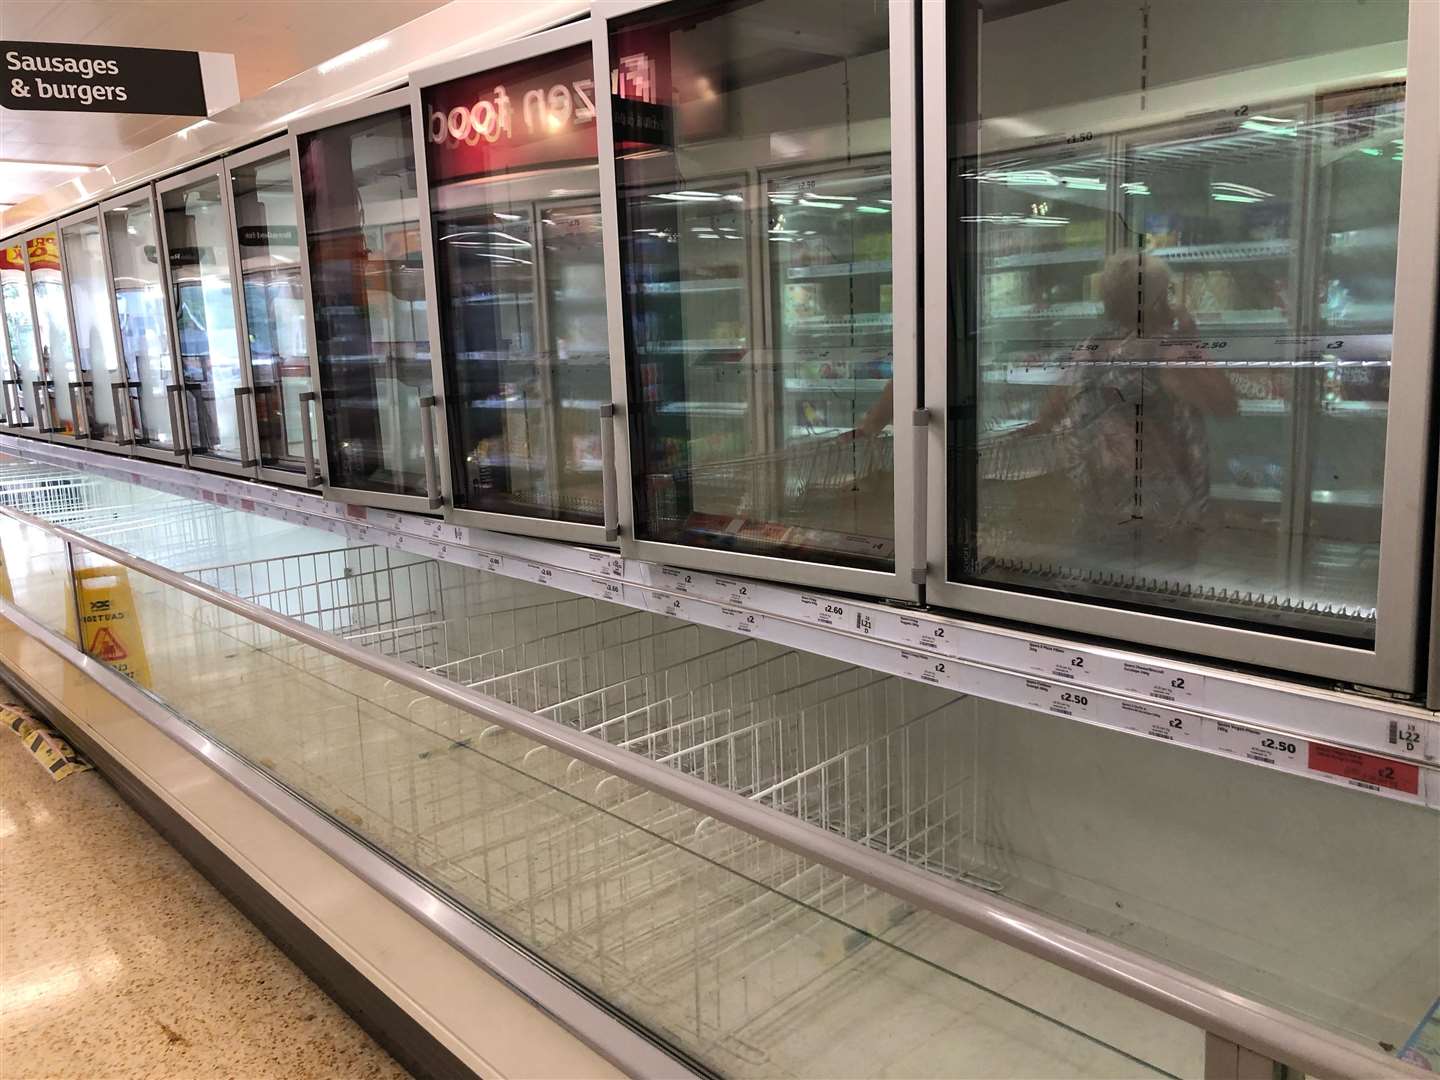 The empty sausage and burger section of the freezer aisle at a Sainsbury supermarket (PA)